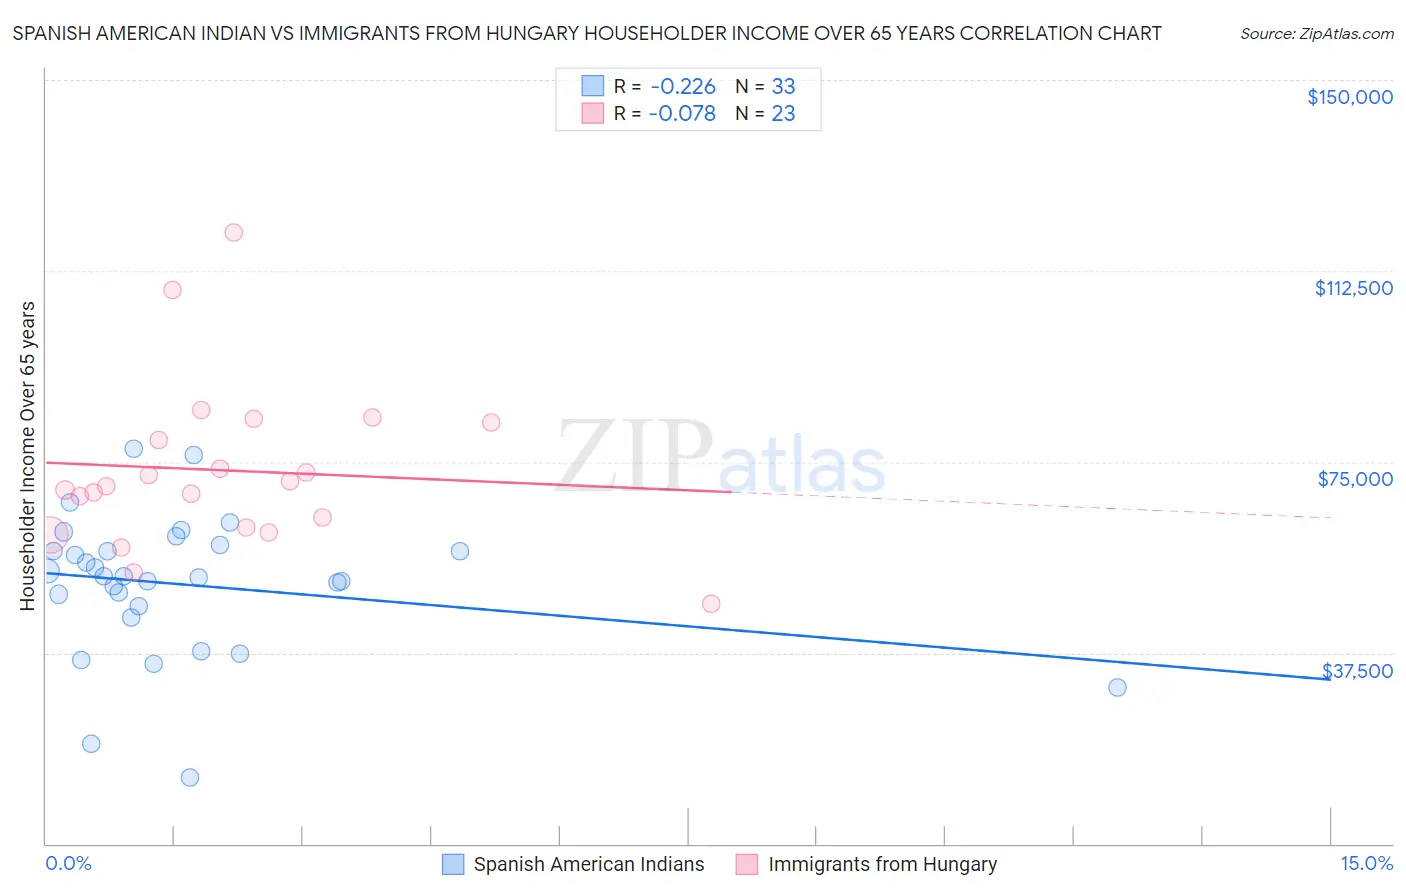 Spanish American Indian vs Immigrants from Hungary Householder Income Over 65 years